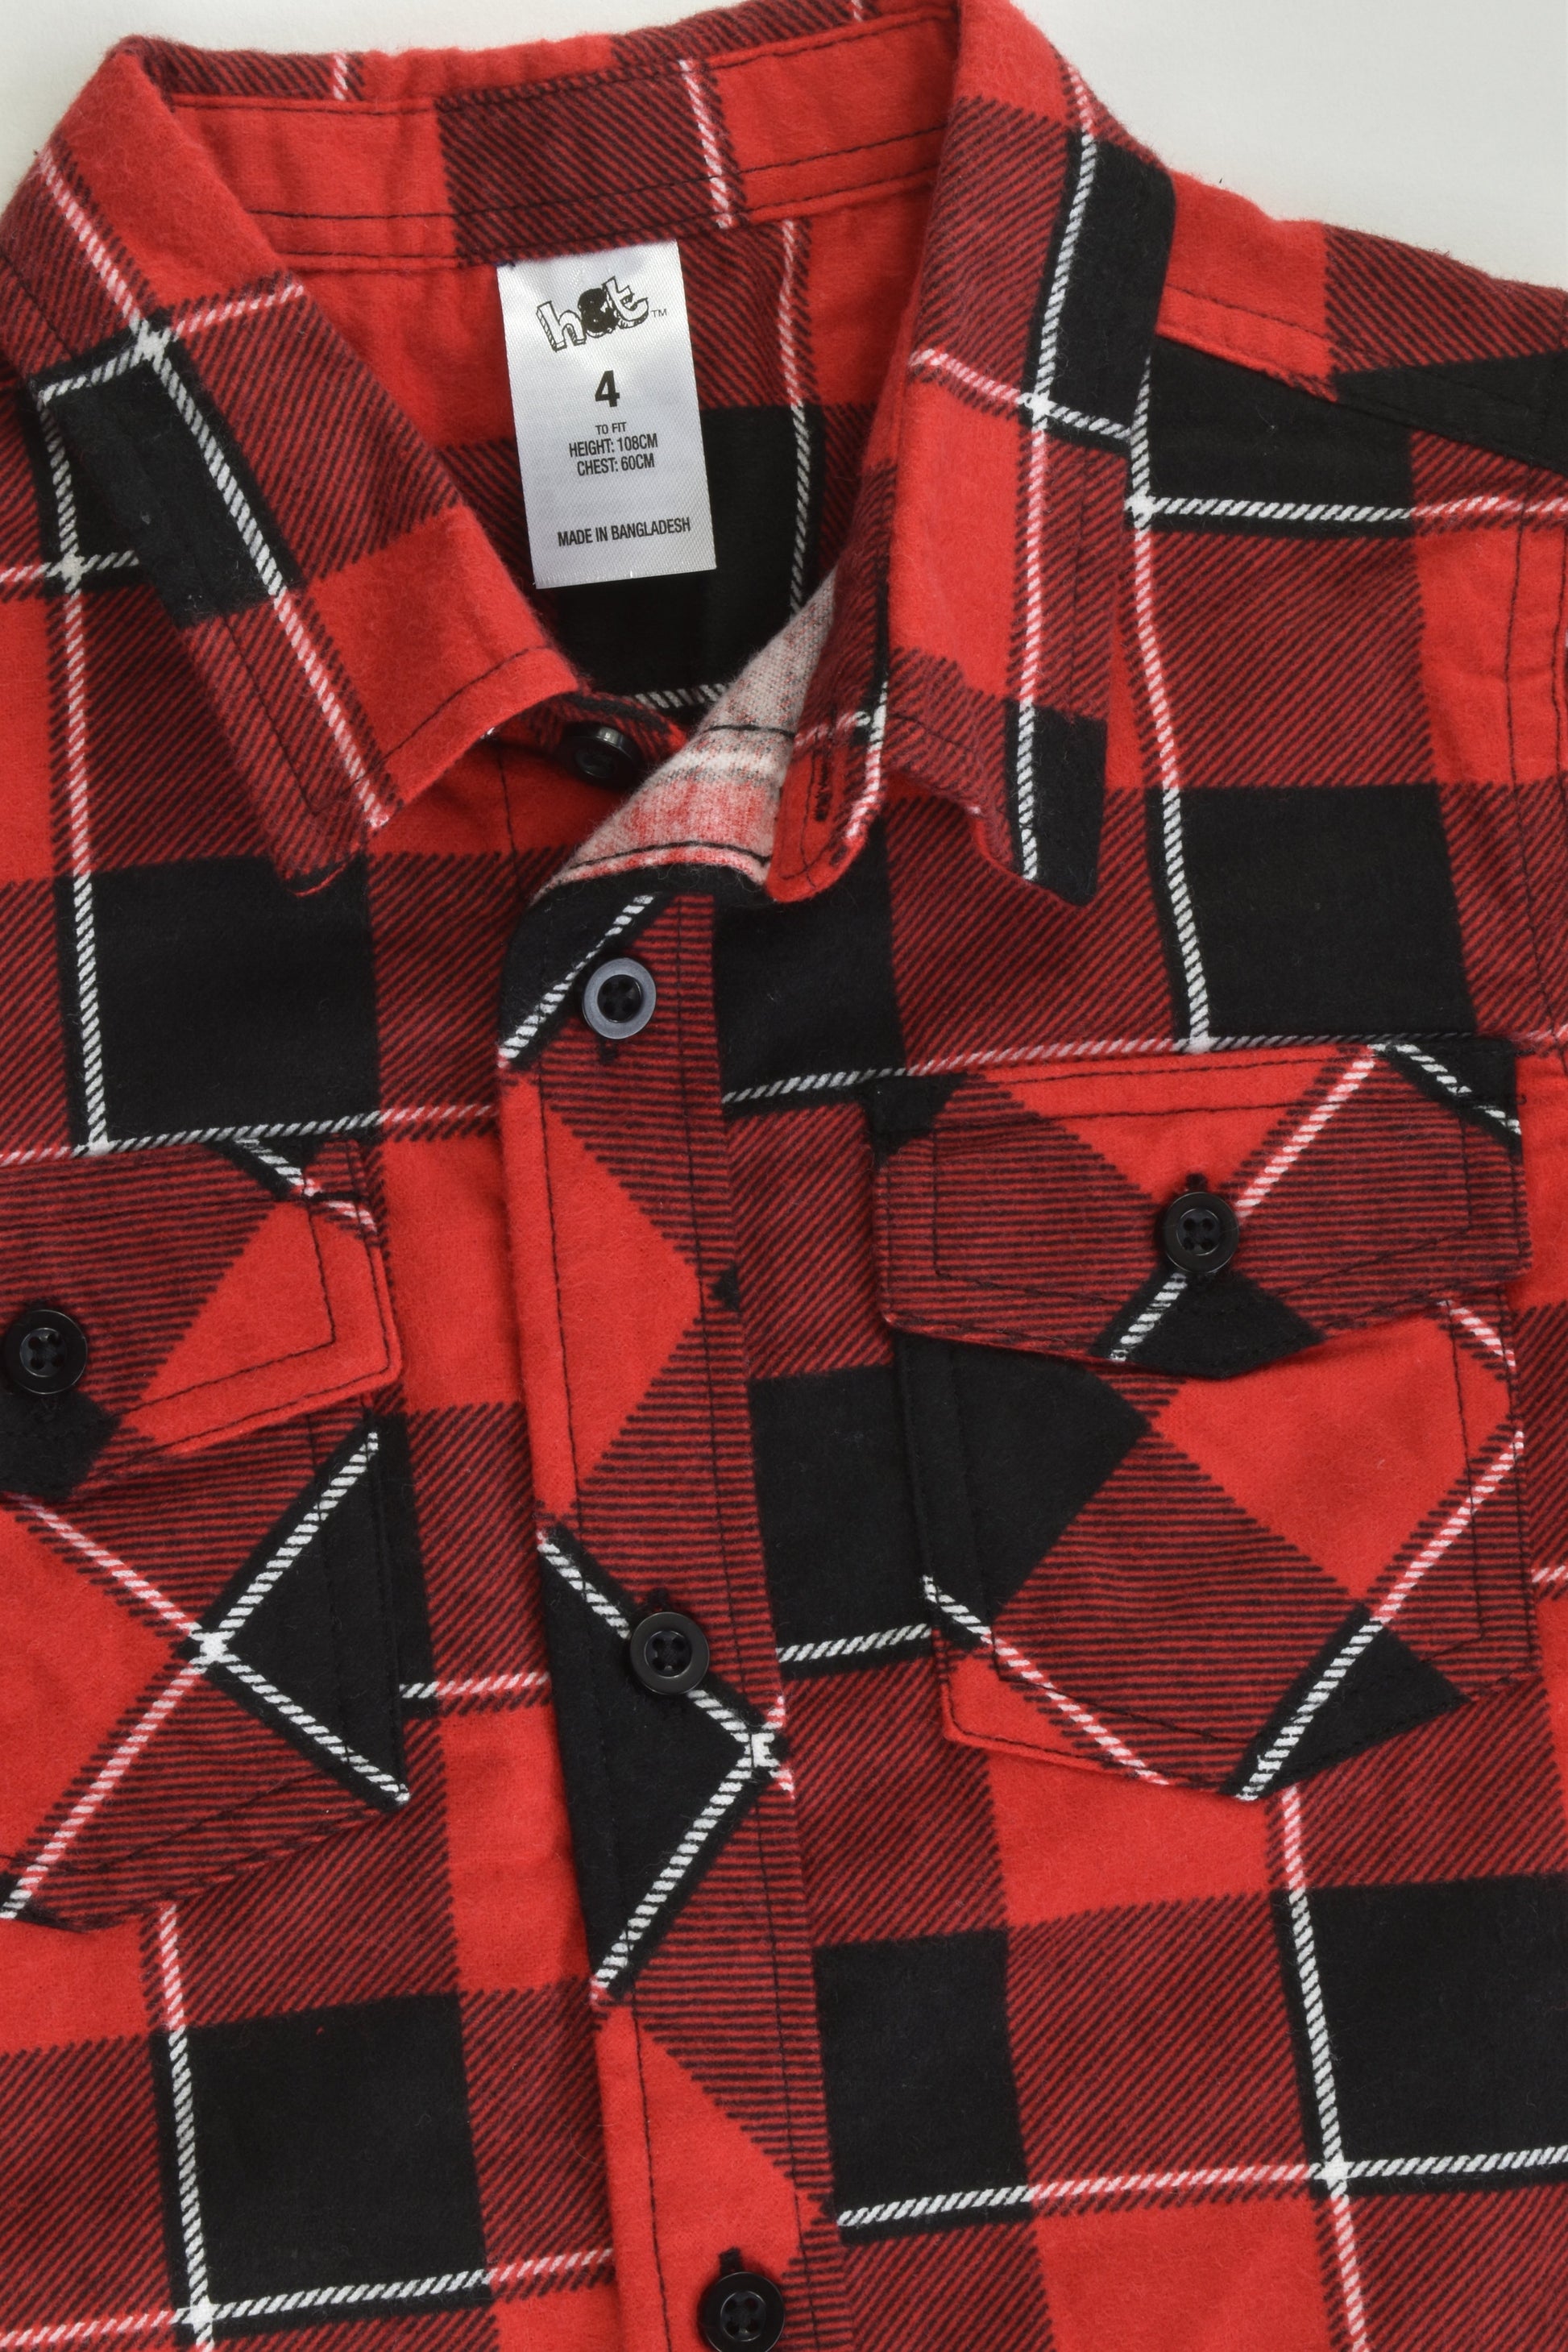 NEW H&T Size 4 Checked Winter Shirt